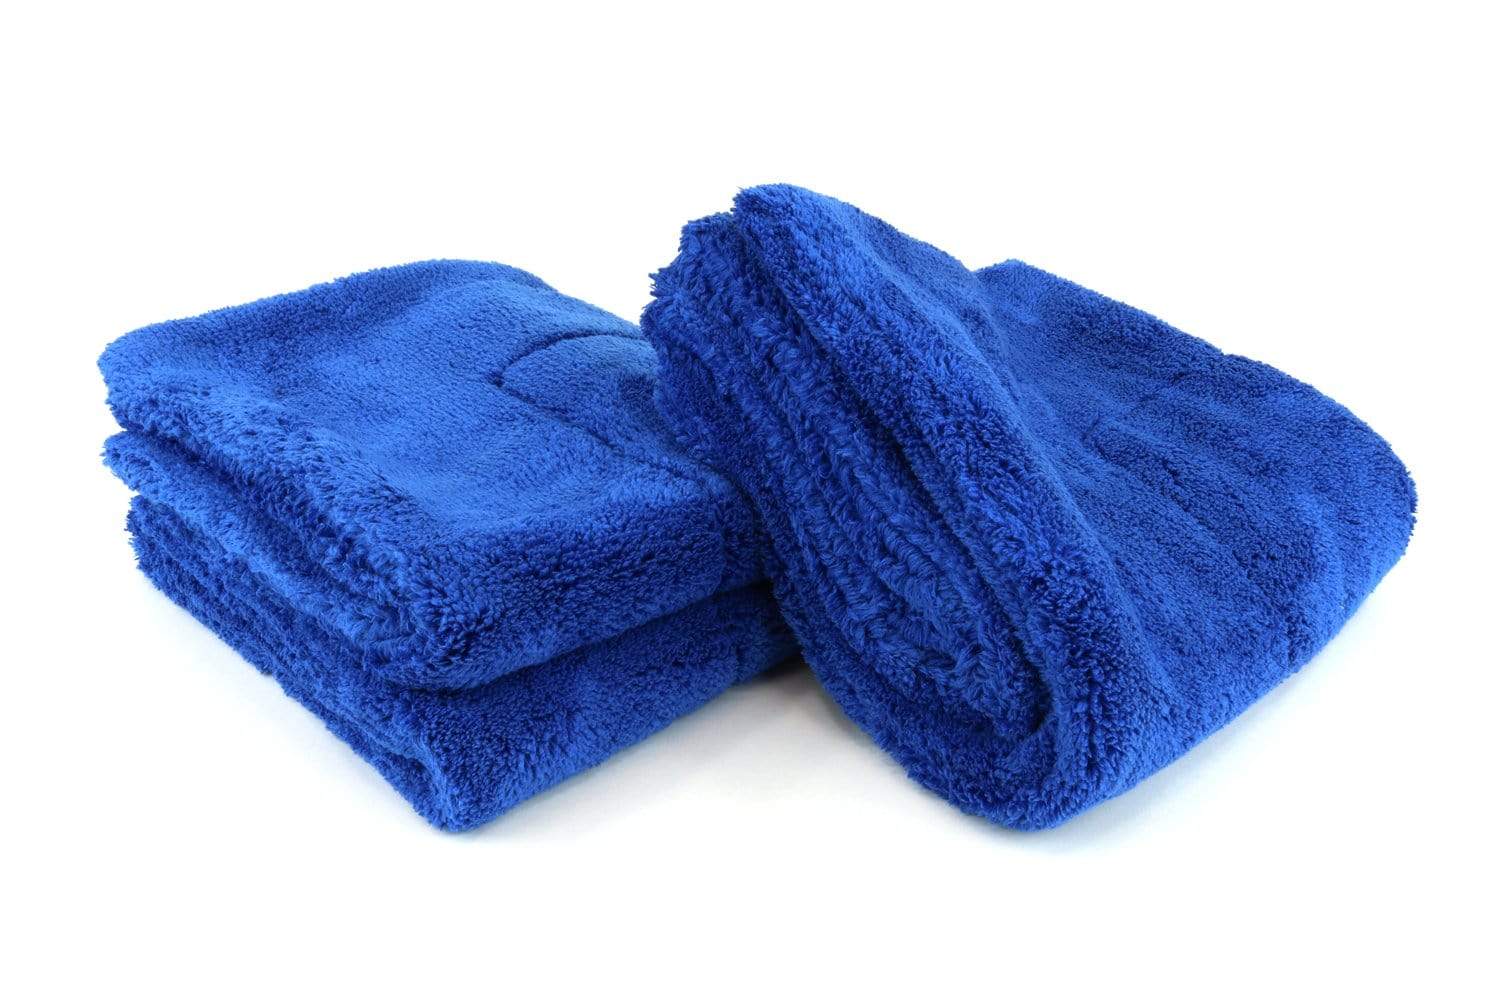 Thick, Plush Microfiber Towels for Washing & Drying | Autofiber